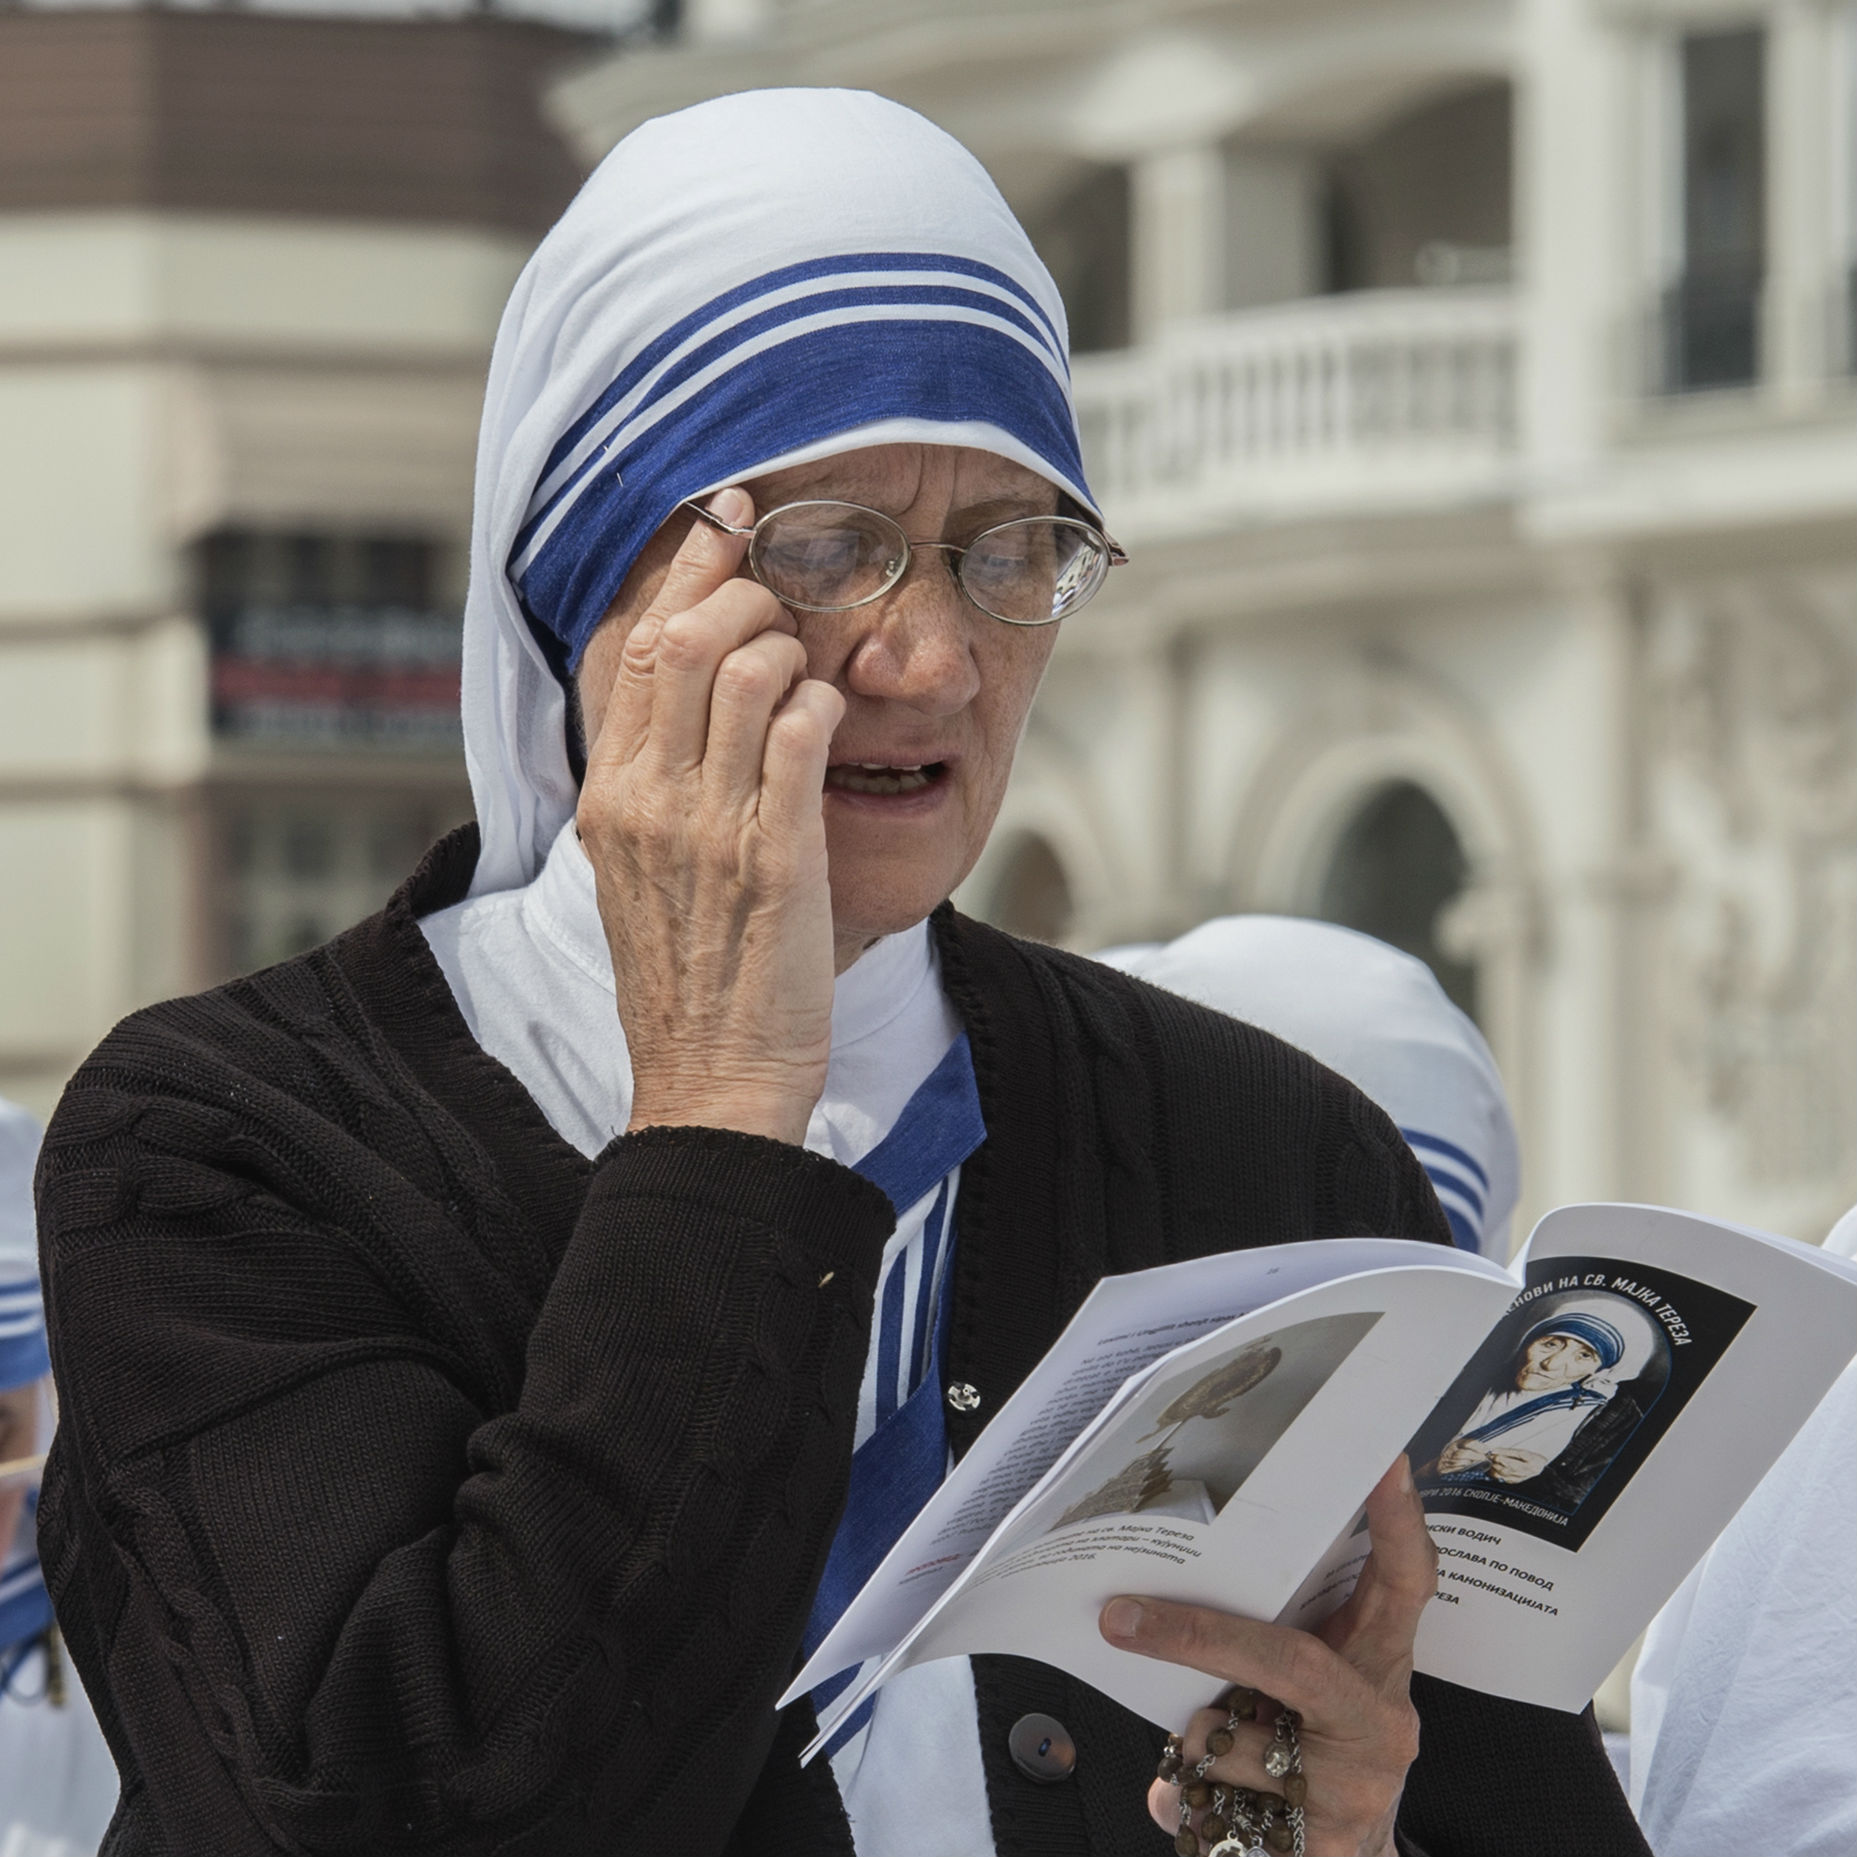 Missionaries of Charity denies involvement with individuals accused of trafficking